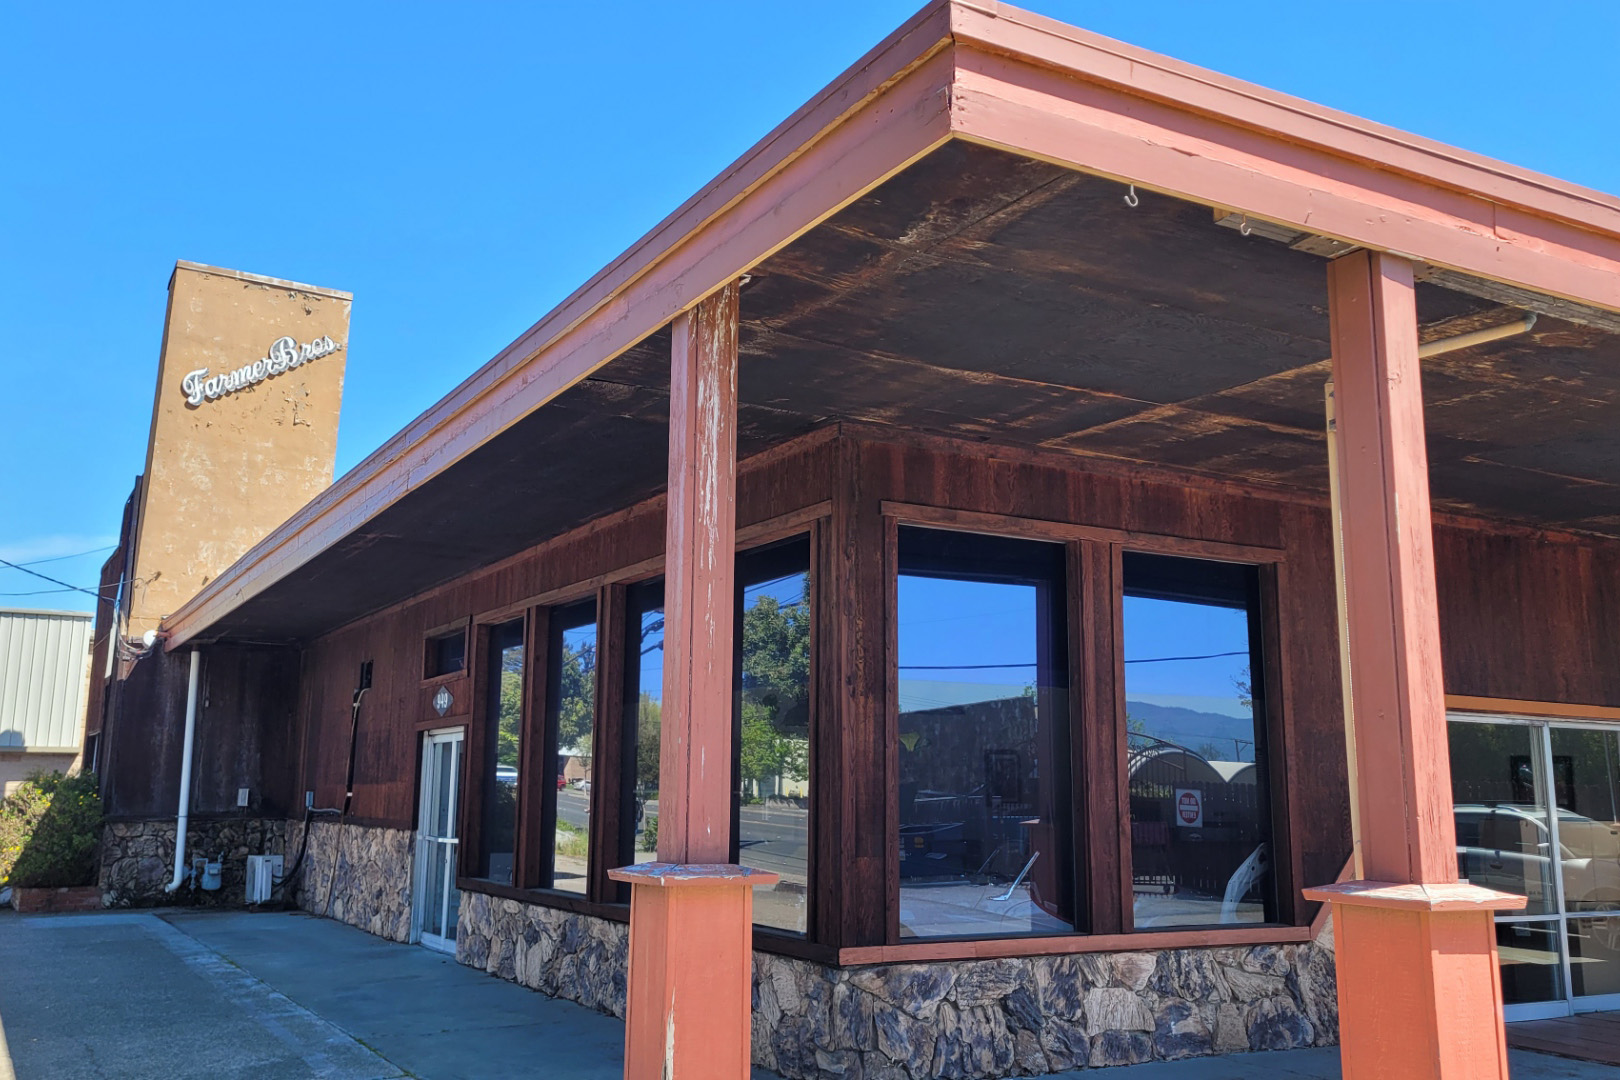 Farmer Brothers - Ukiah commercial business exterior